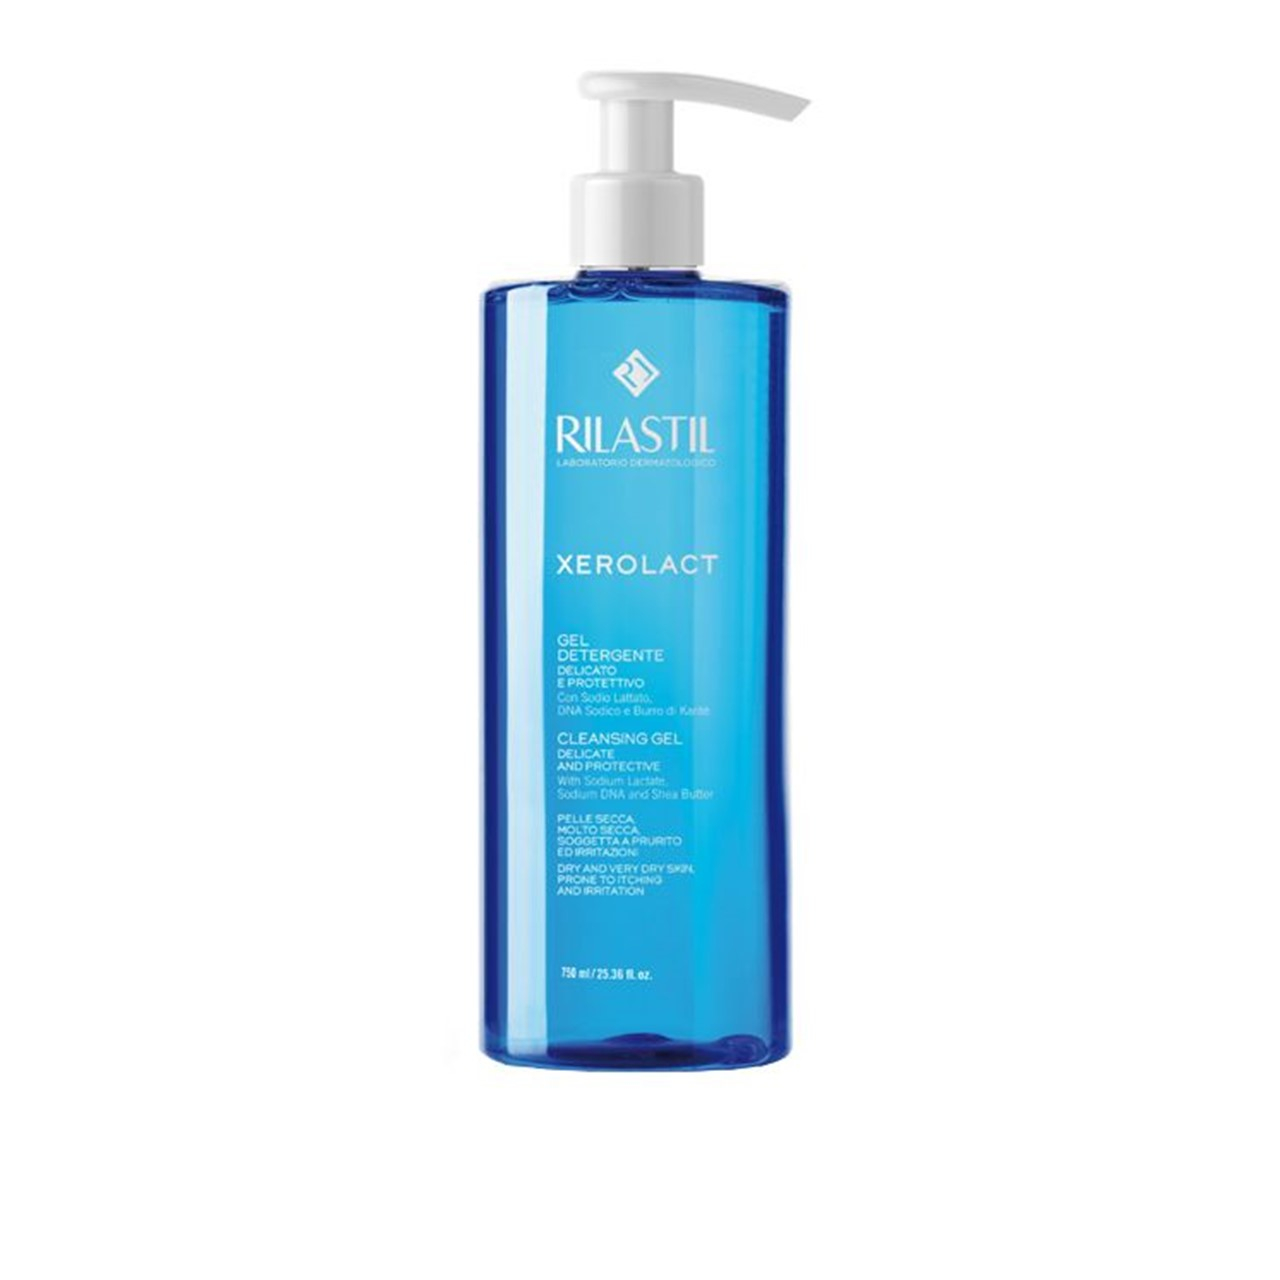 Rilastil Xerolact Cleansing Gel Delicate and Protective 750ml